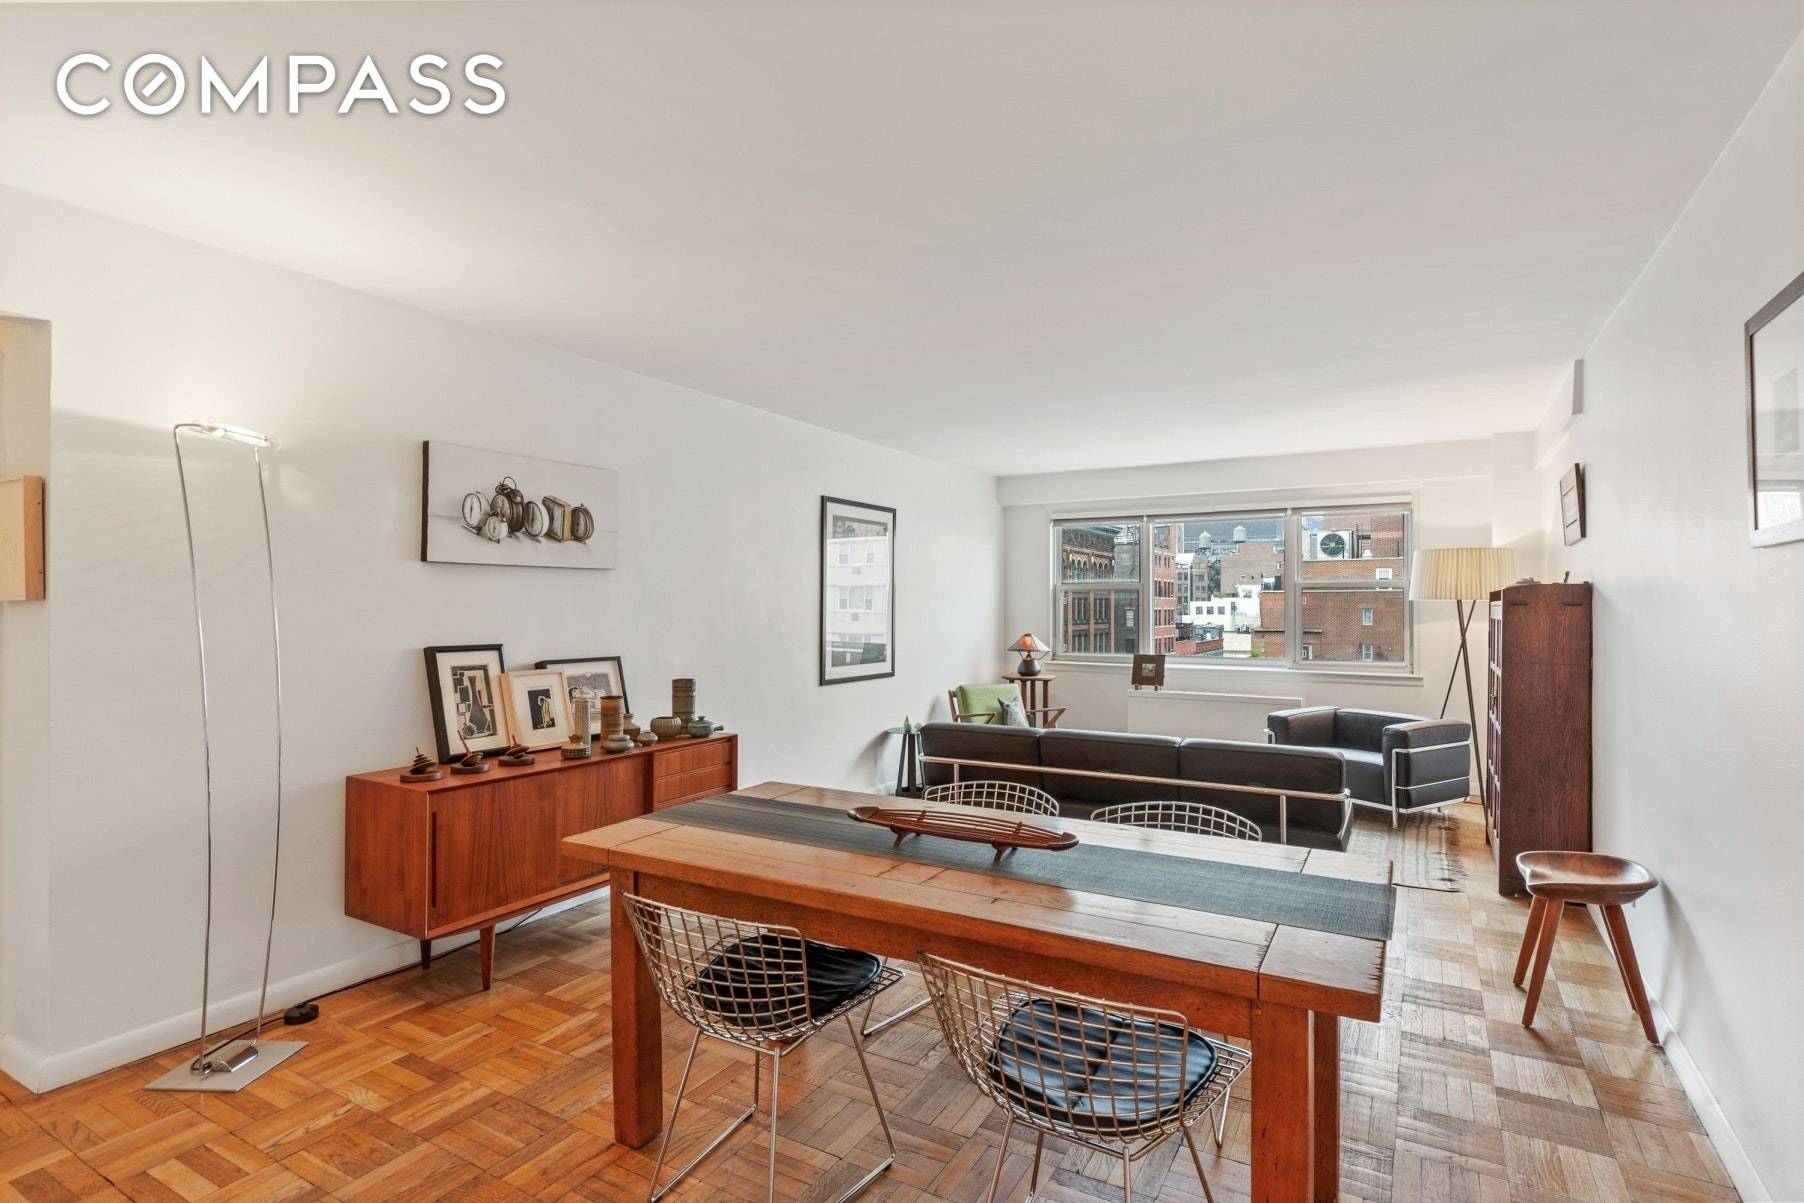 PRIME GREENWICH VILLAGE ONE BEDROOM DEAL Endless sky and open city views create a picture perfect backdrop for this equally impressive home.